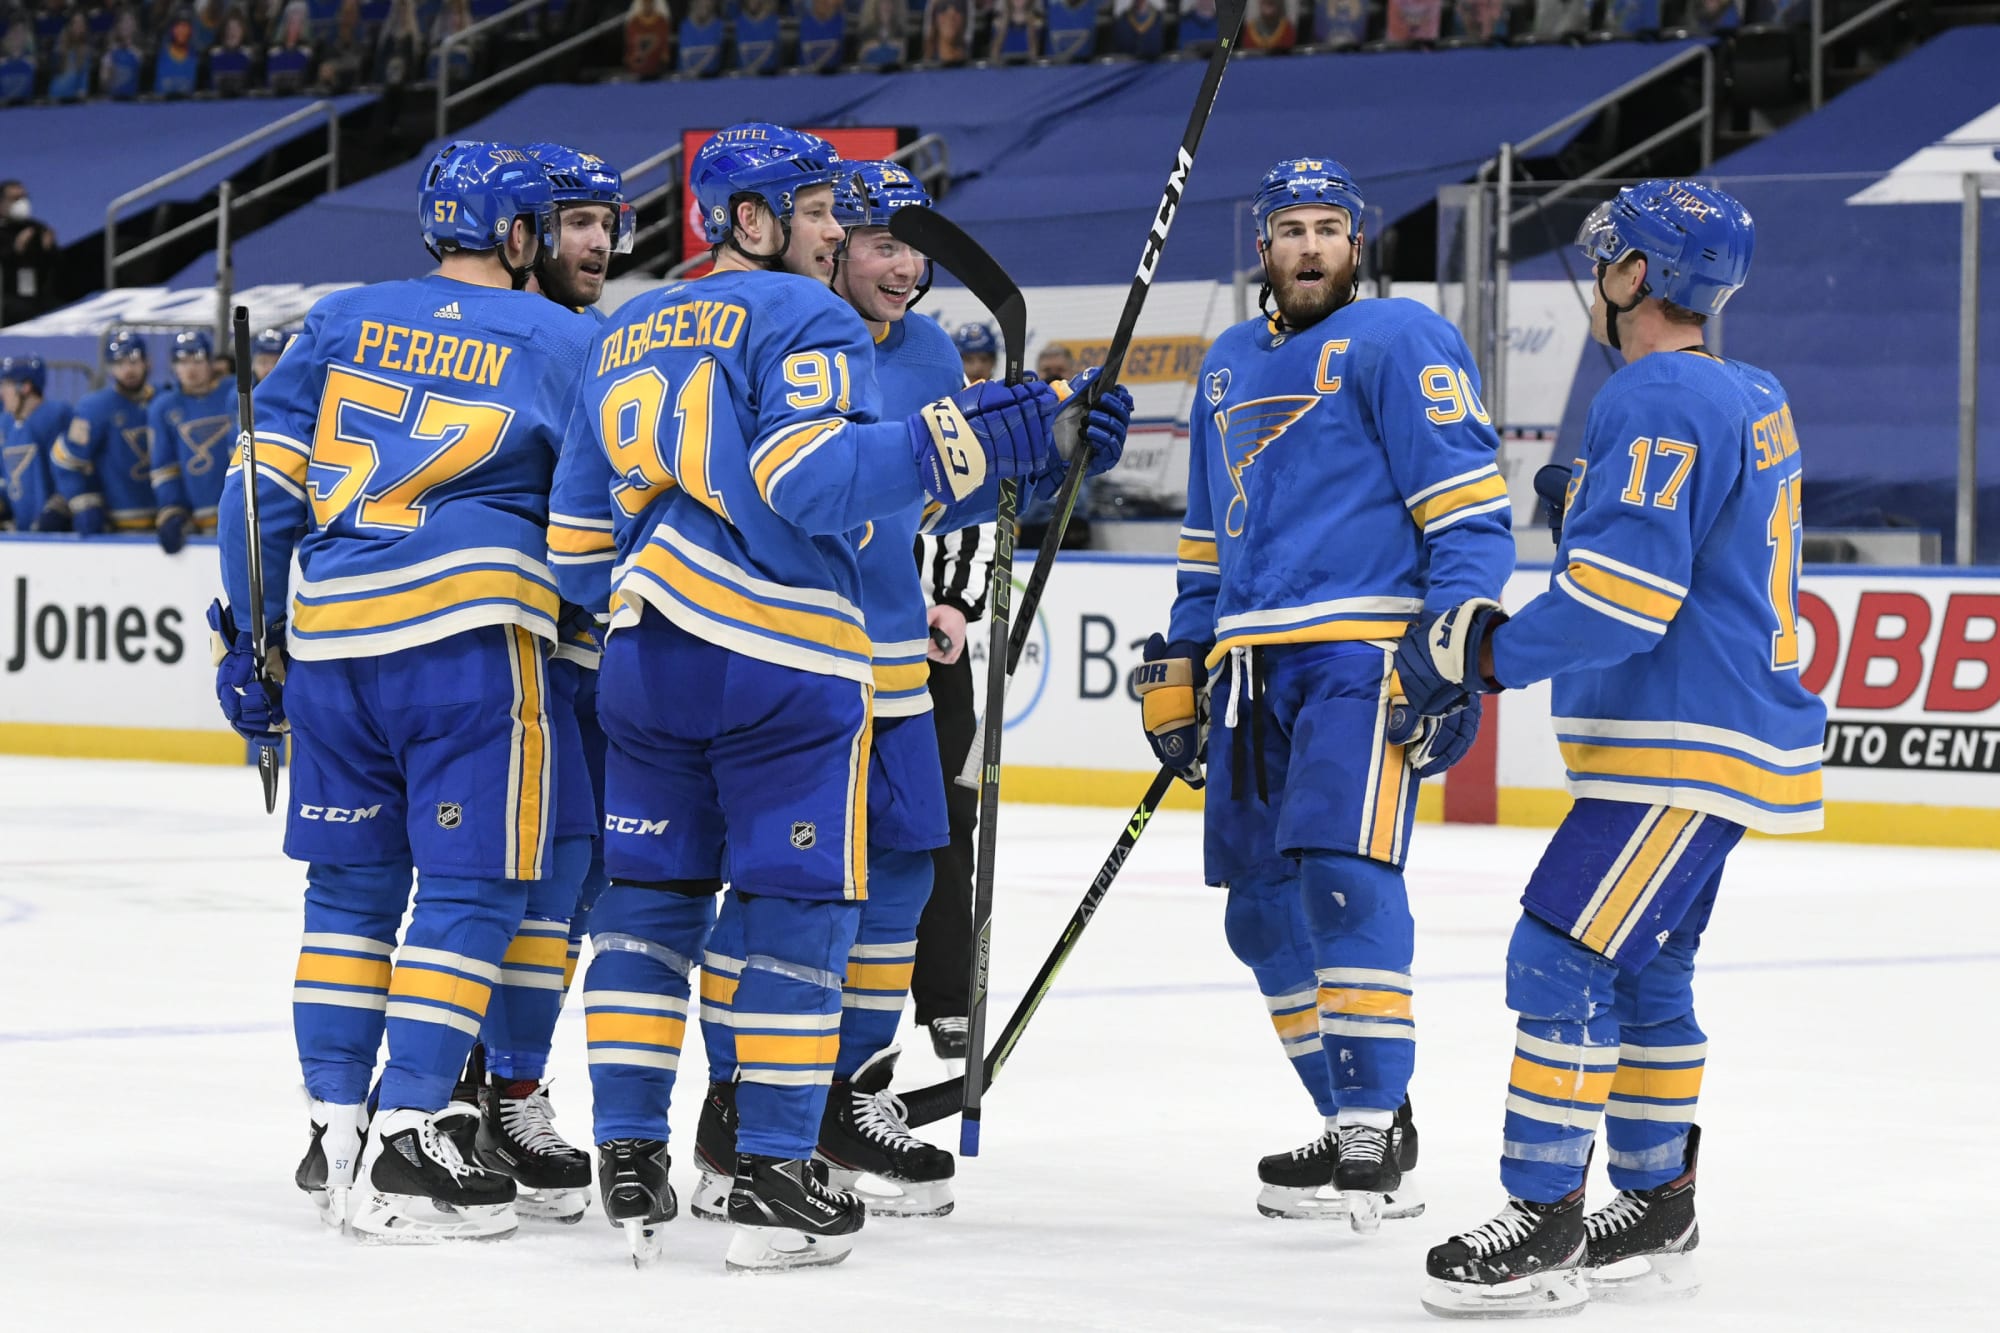 St. Louis Blues Back In Playoff Driver's Seat...For Now